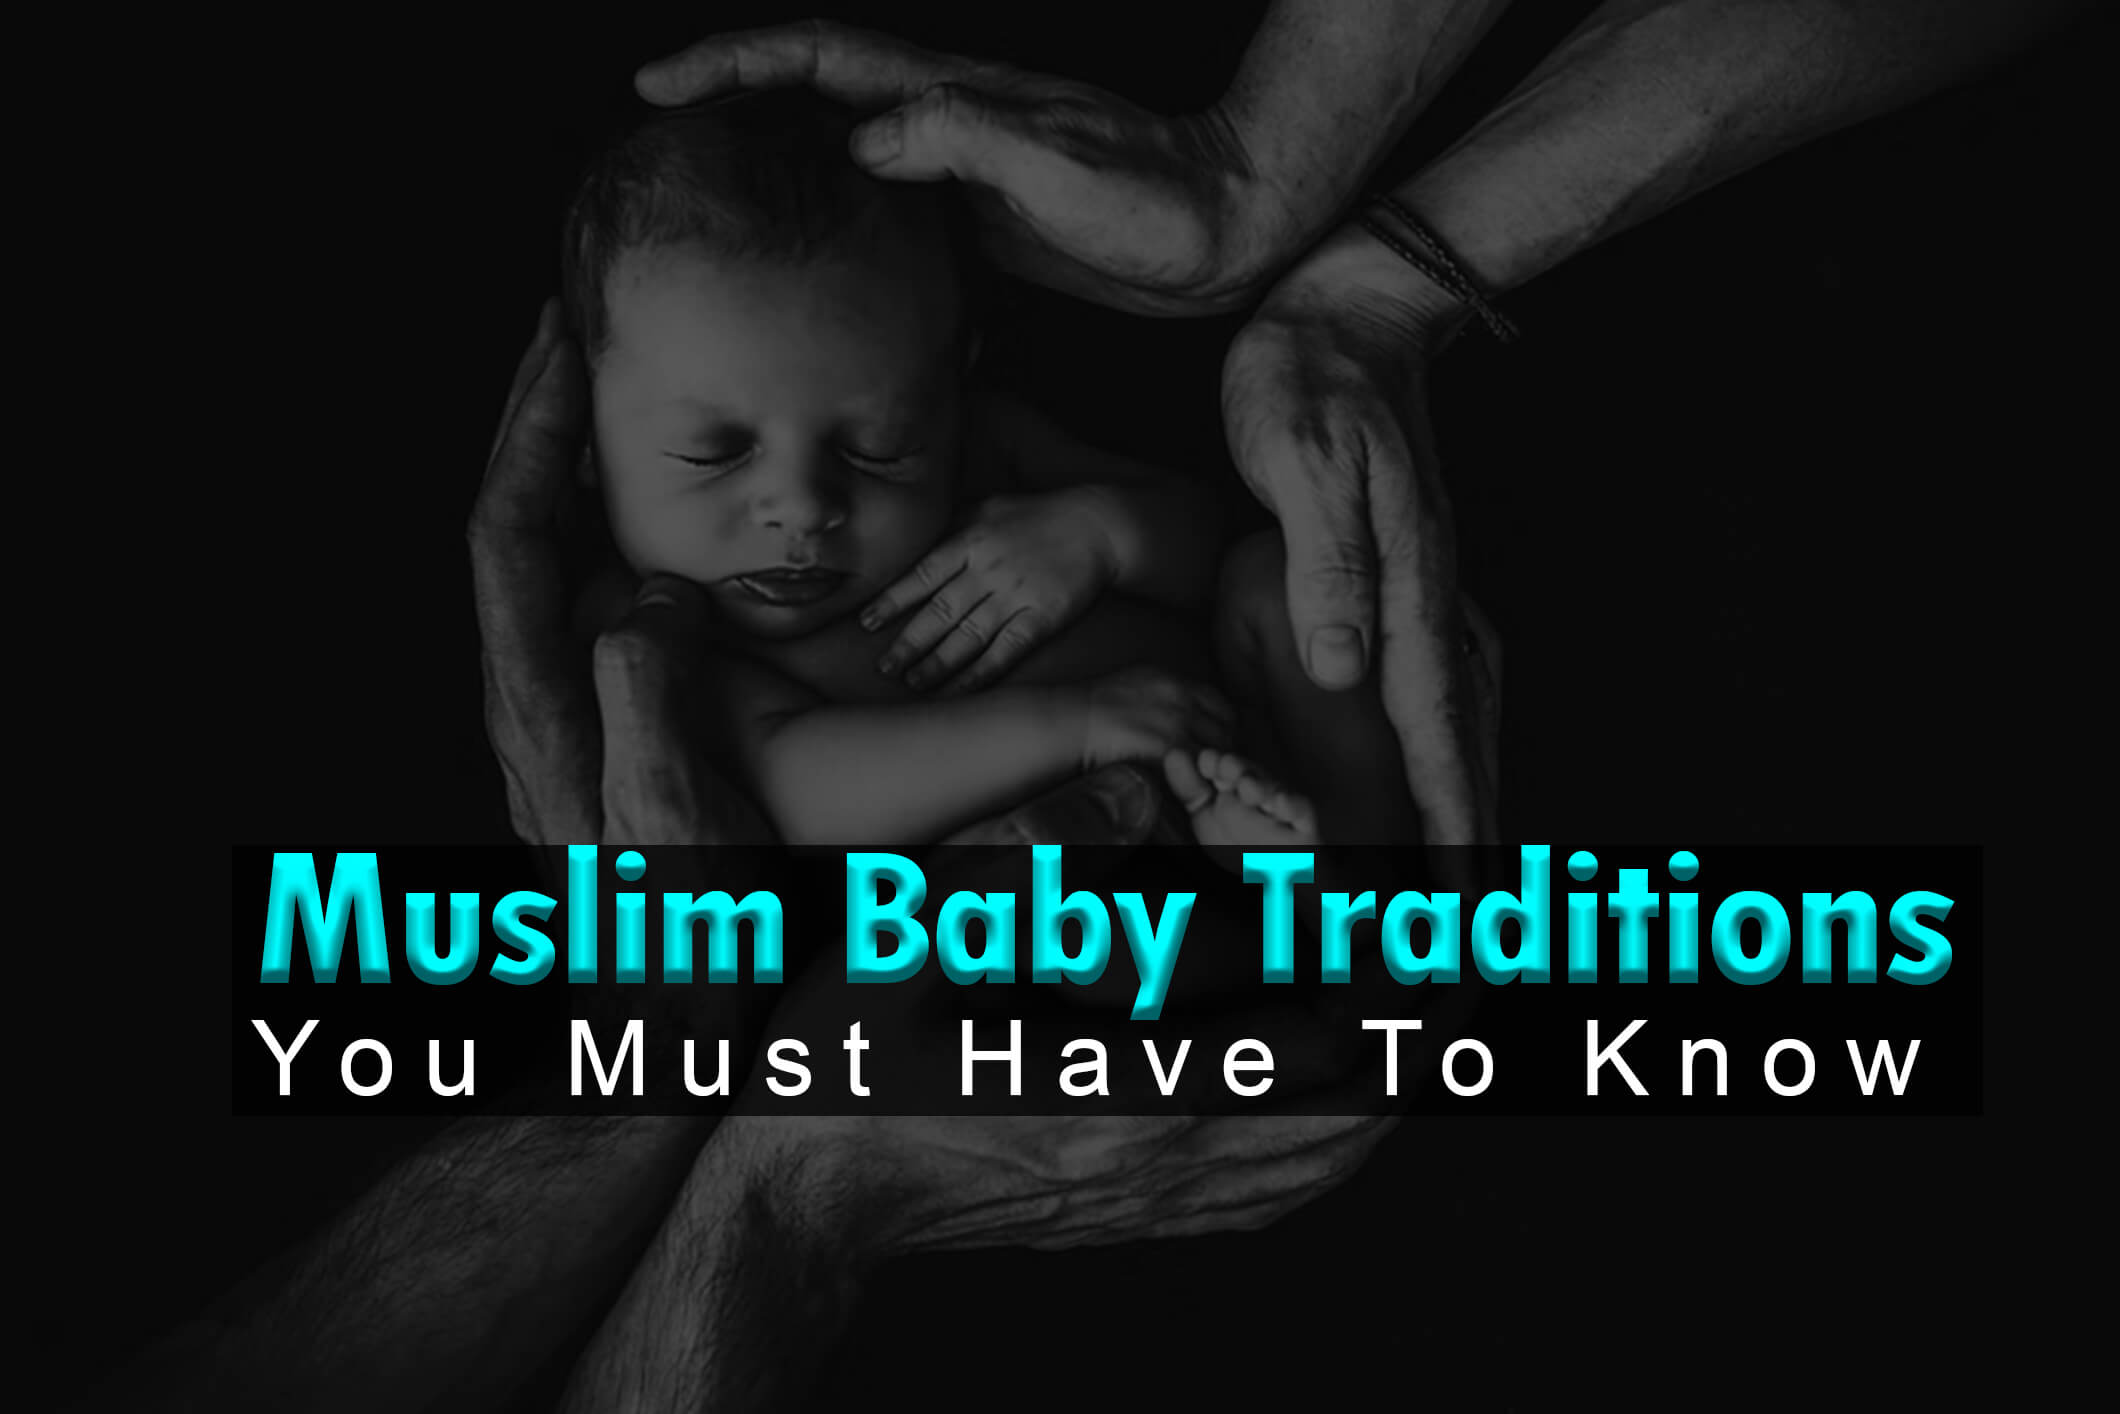 Muslim Baby Traditions